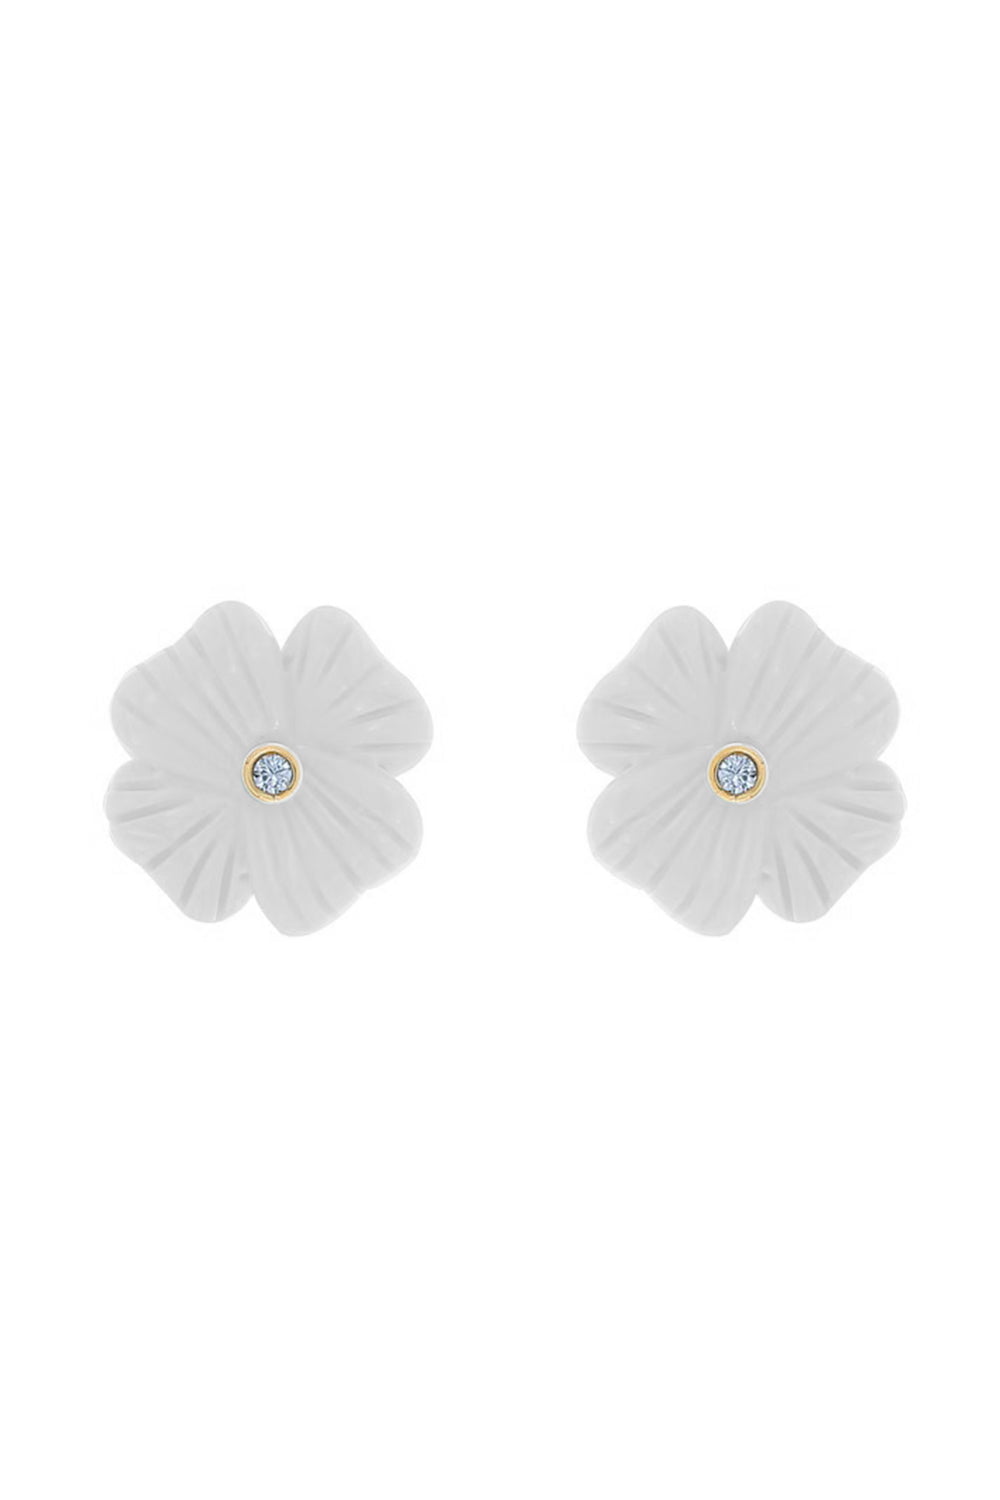 BRENT NEALE-Small White Agate Clover Stud Earrings-YELLOW GOLD